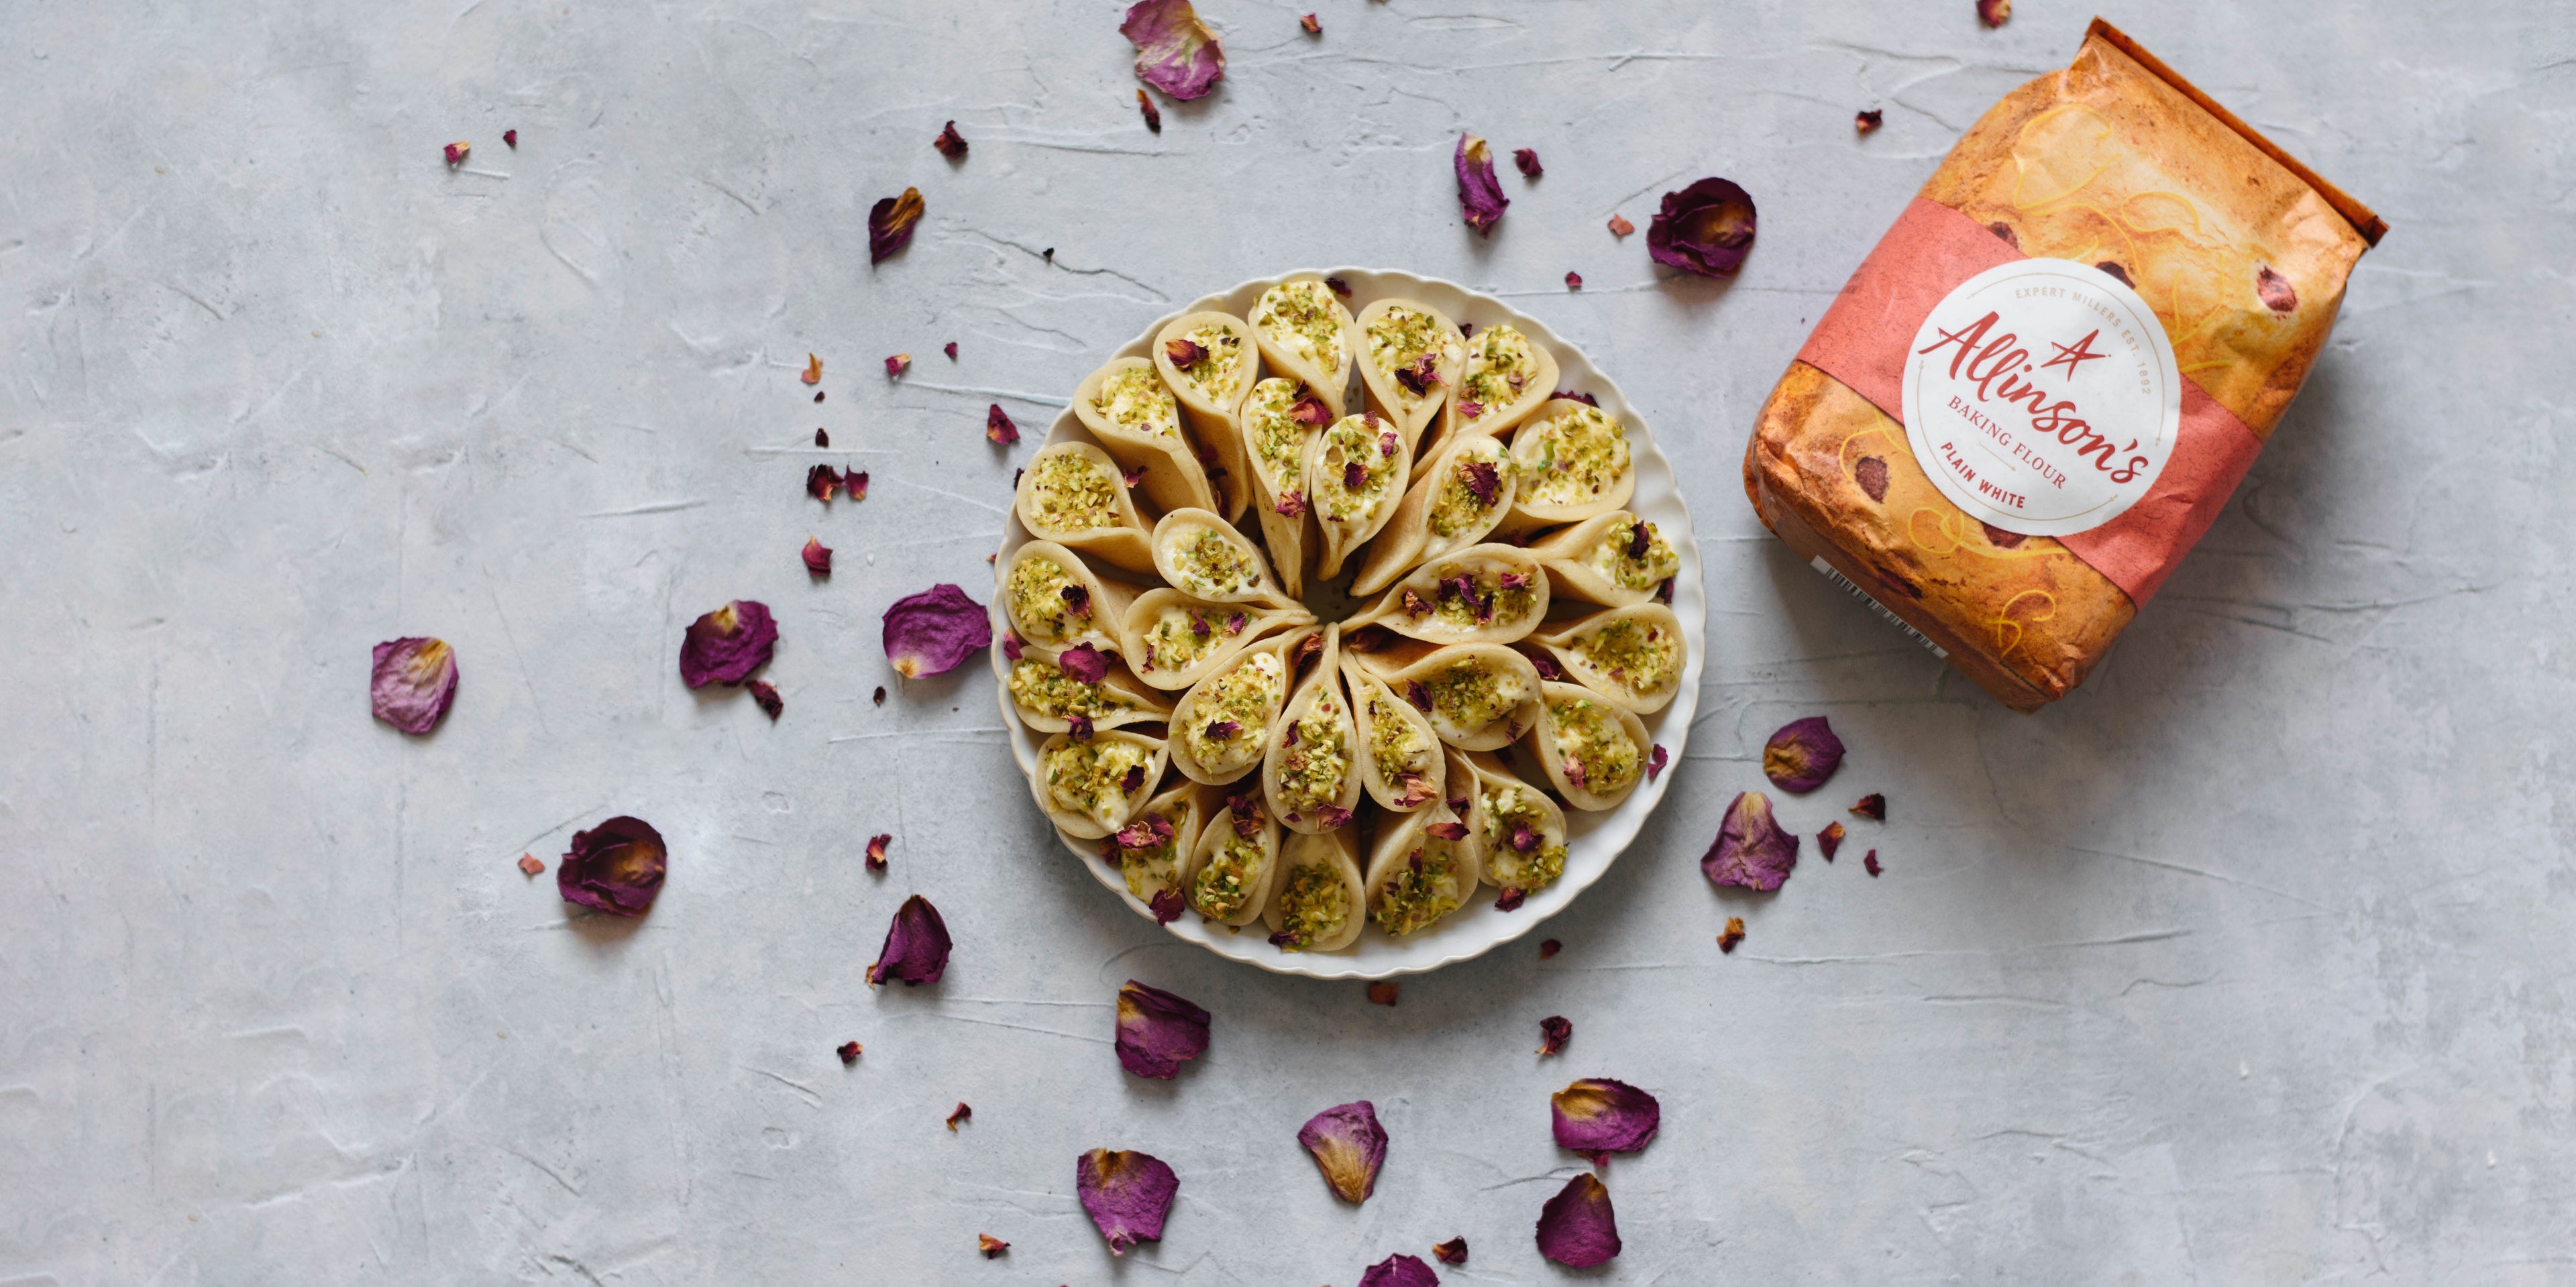 Qatayef on a plate decorated with petals